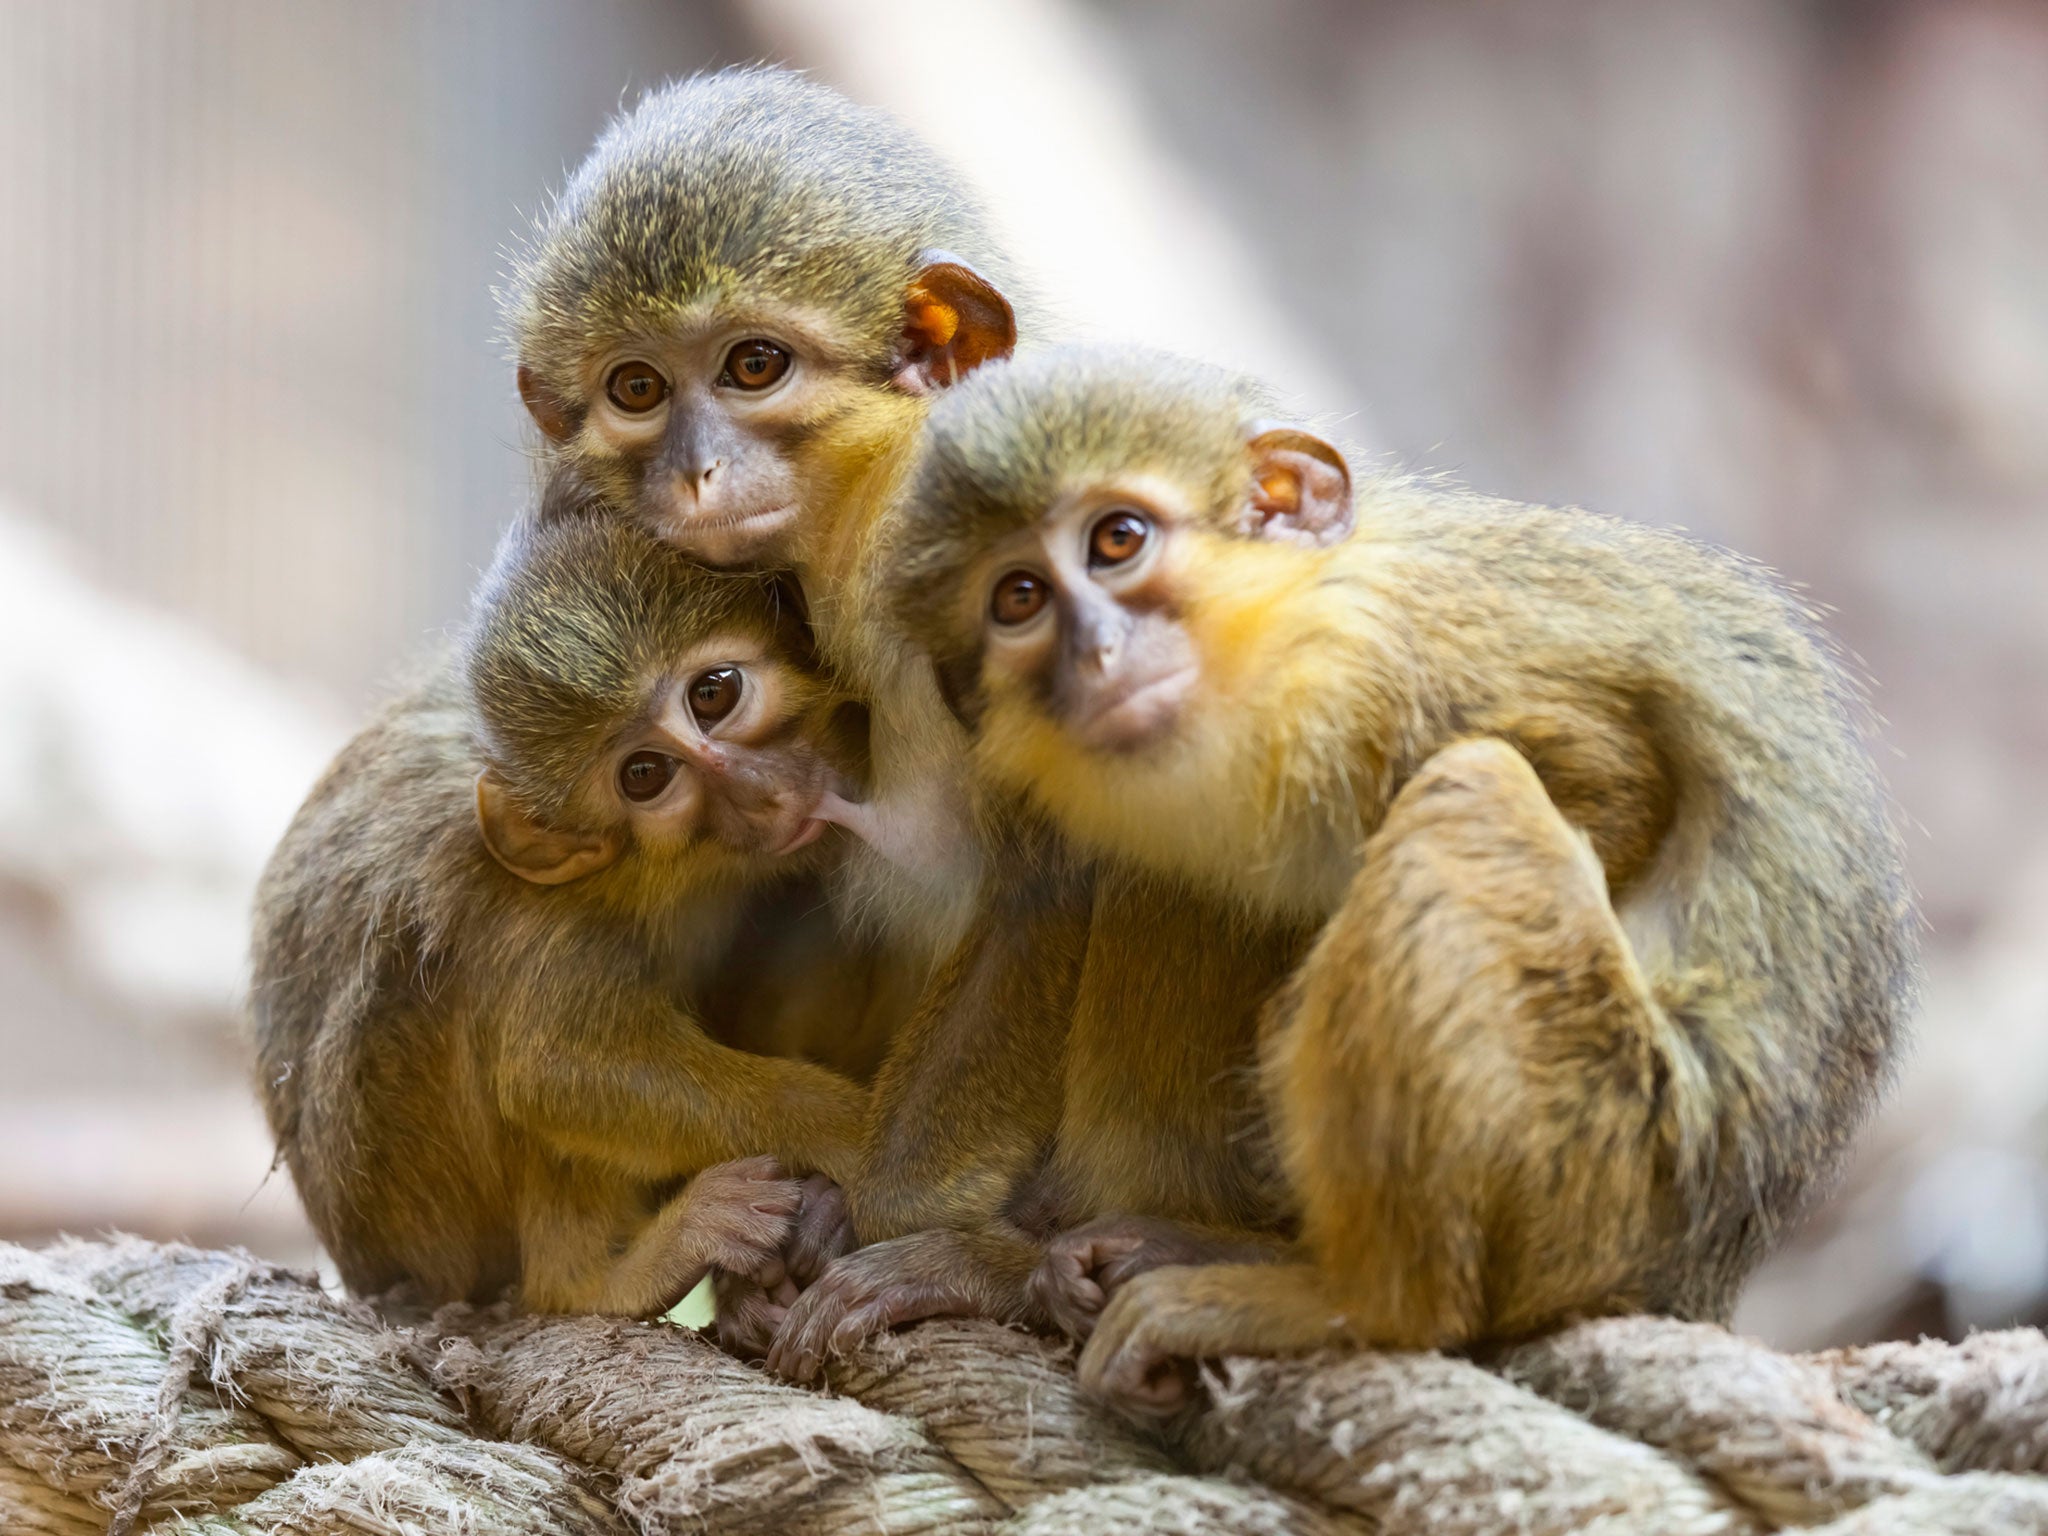 Monkeys Mating With Humans Sex - Monkeys - latest news, breaking stories and comment - The ...